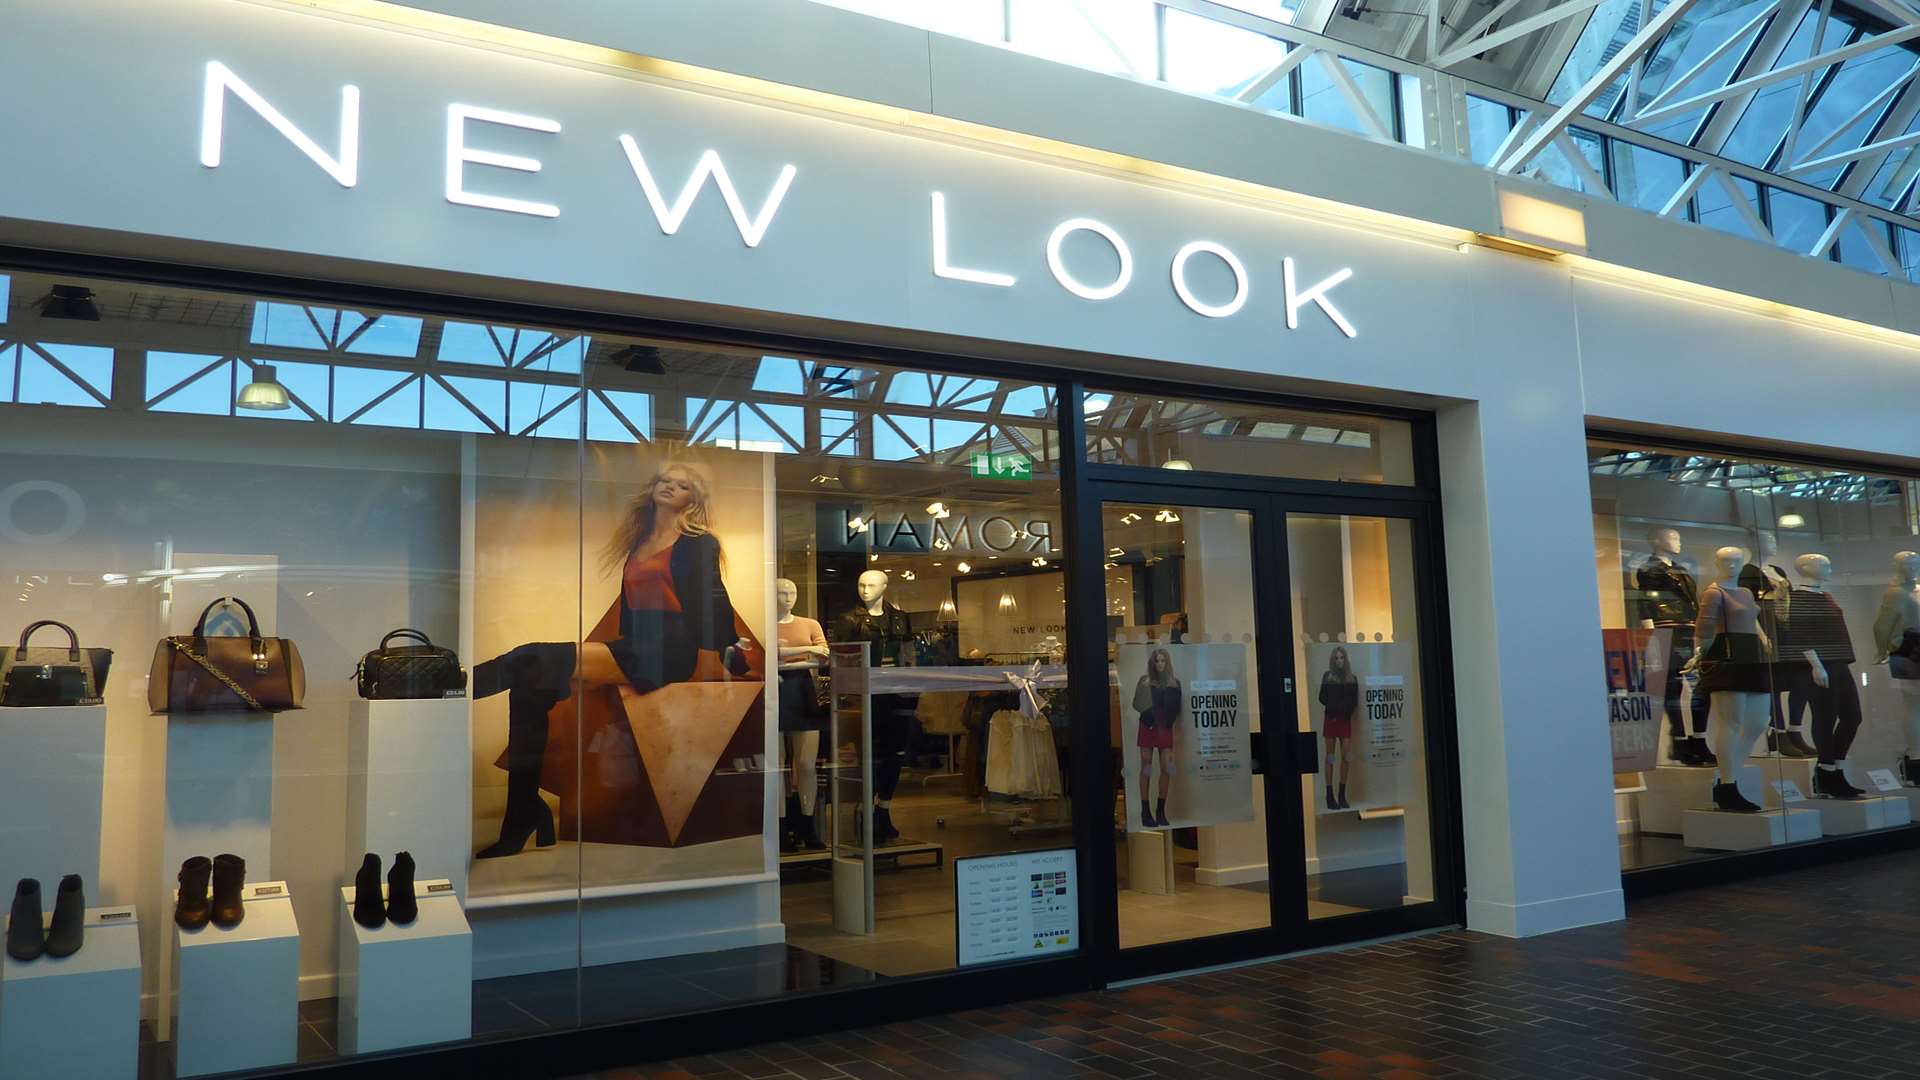 The New Look store at Hempstead Valley Shopping Centre